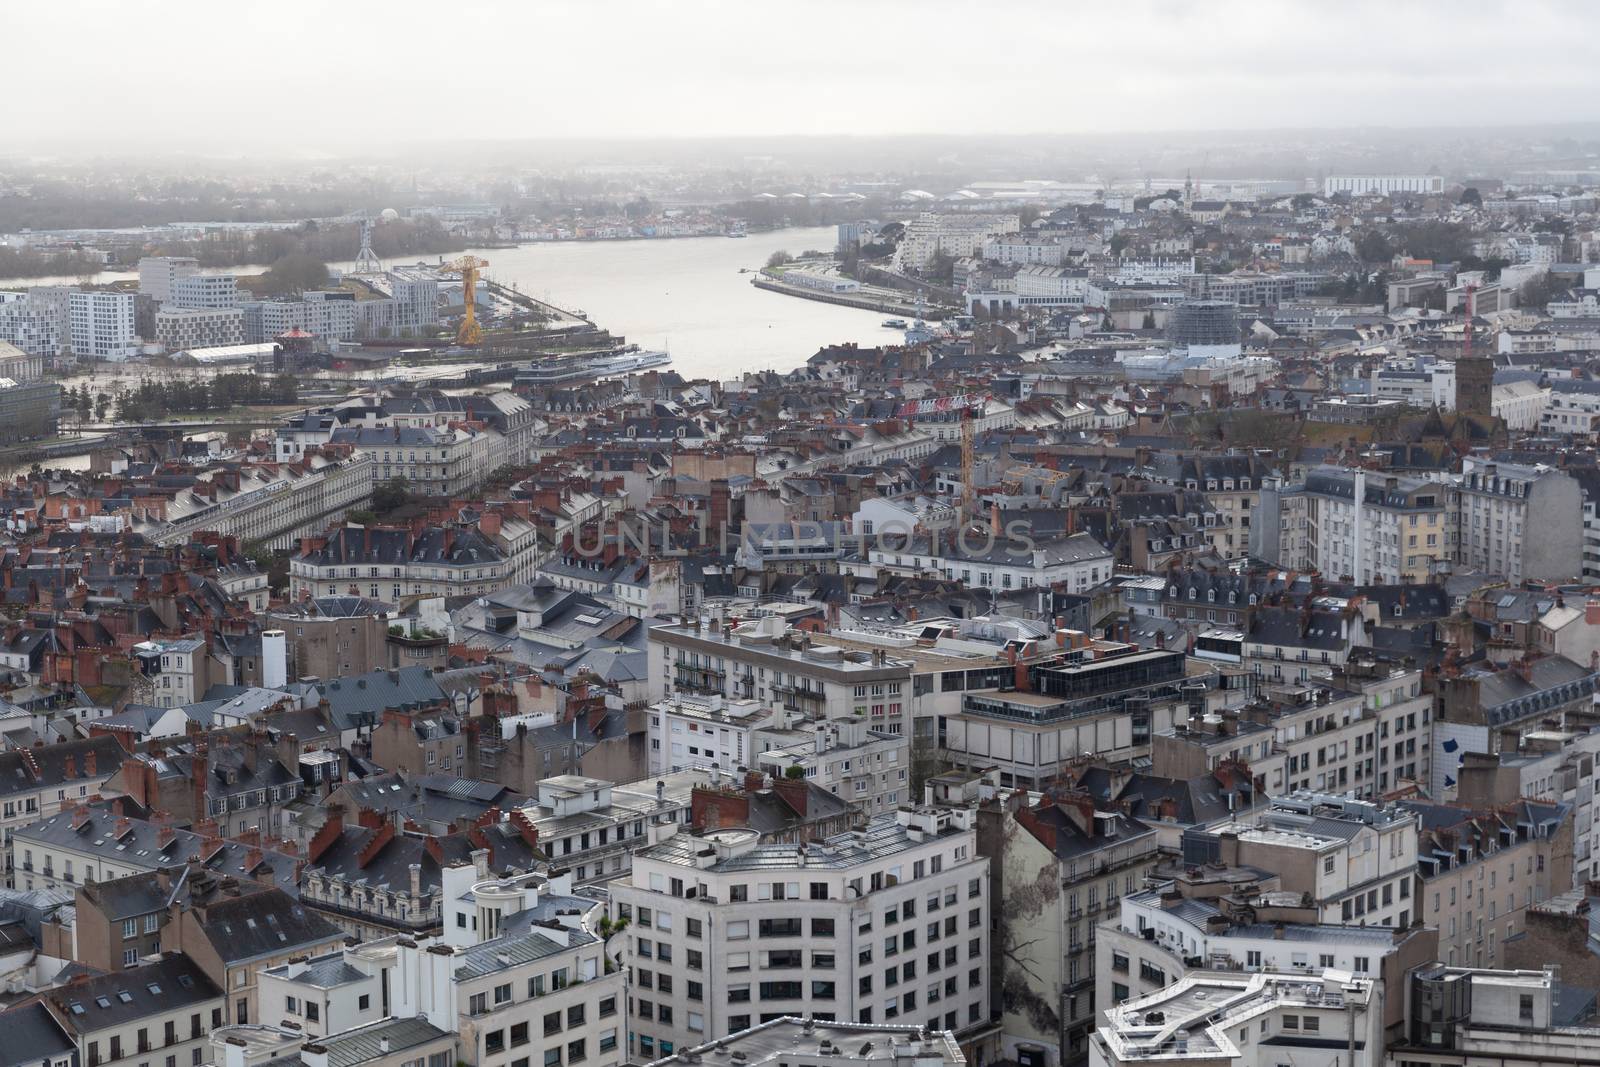 Aerial view of Nantes, France by vlad-m